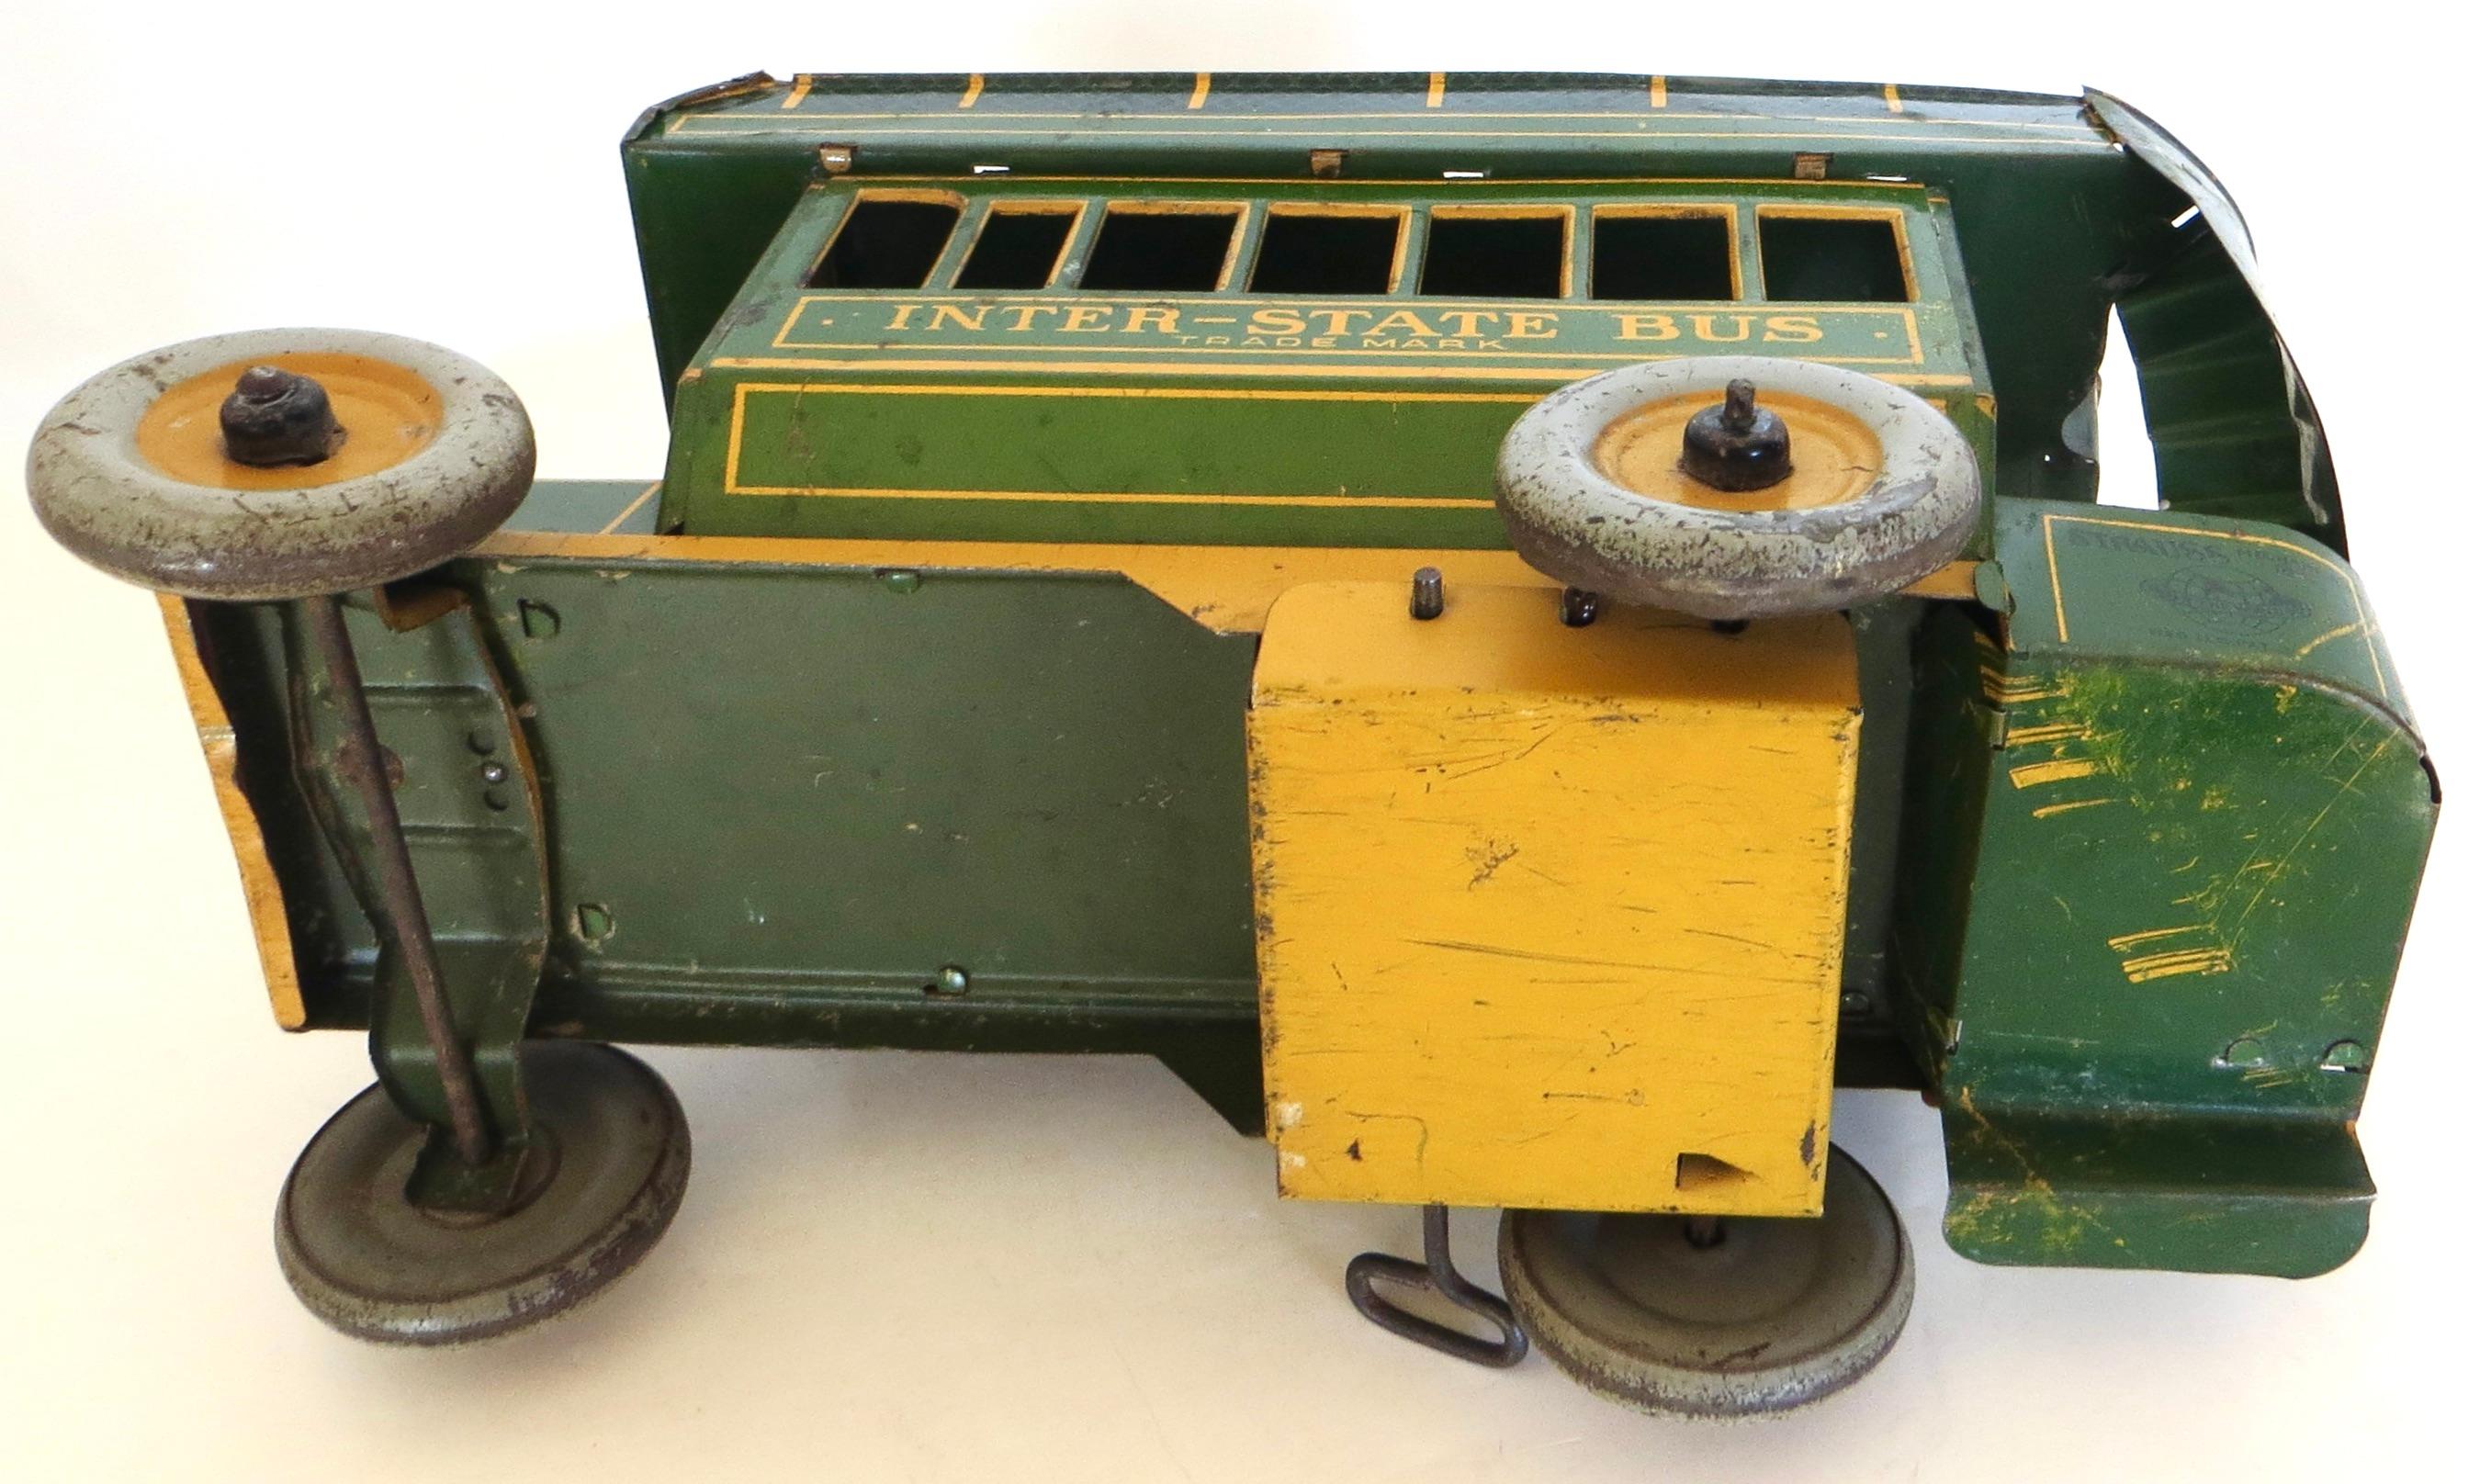 Antique Toy Wind-Up Double Decker Bus by Ferdinand Strauss Toy Co. Circa 1925 In Good Condition For Sale In Incline Village, NV